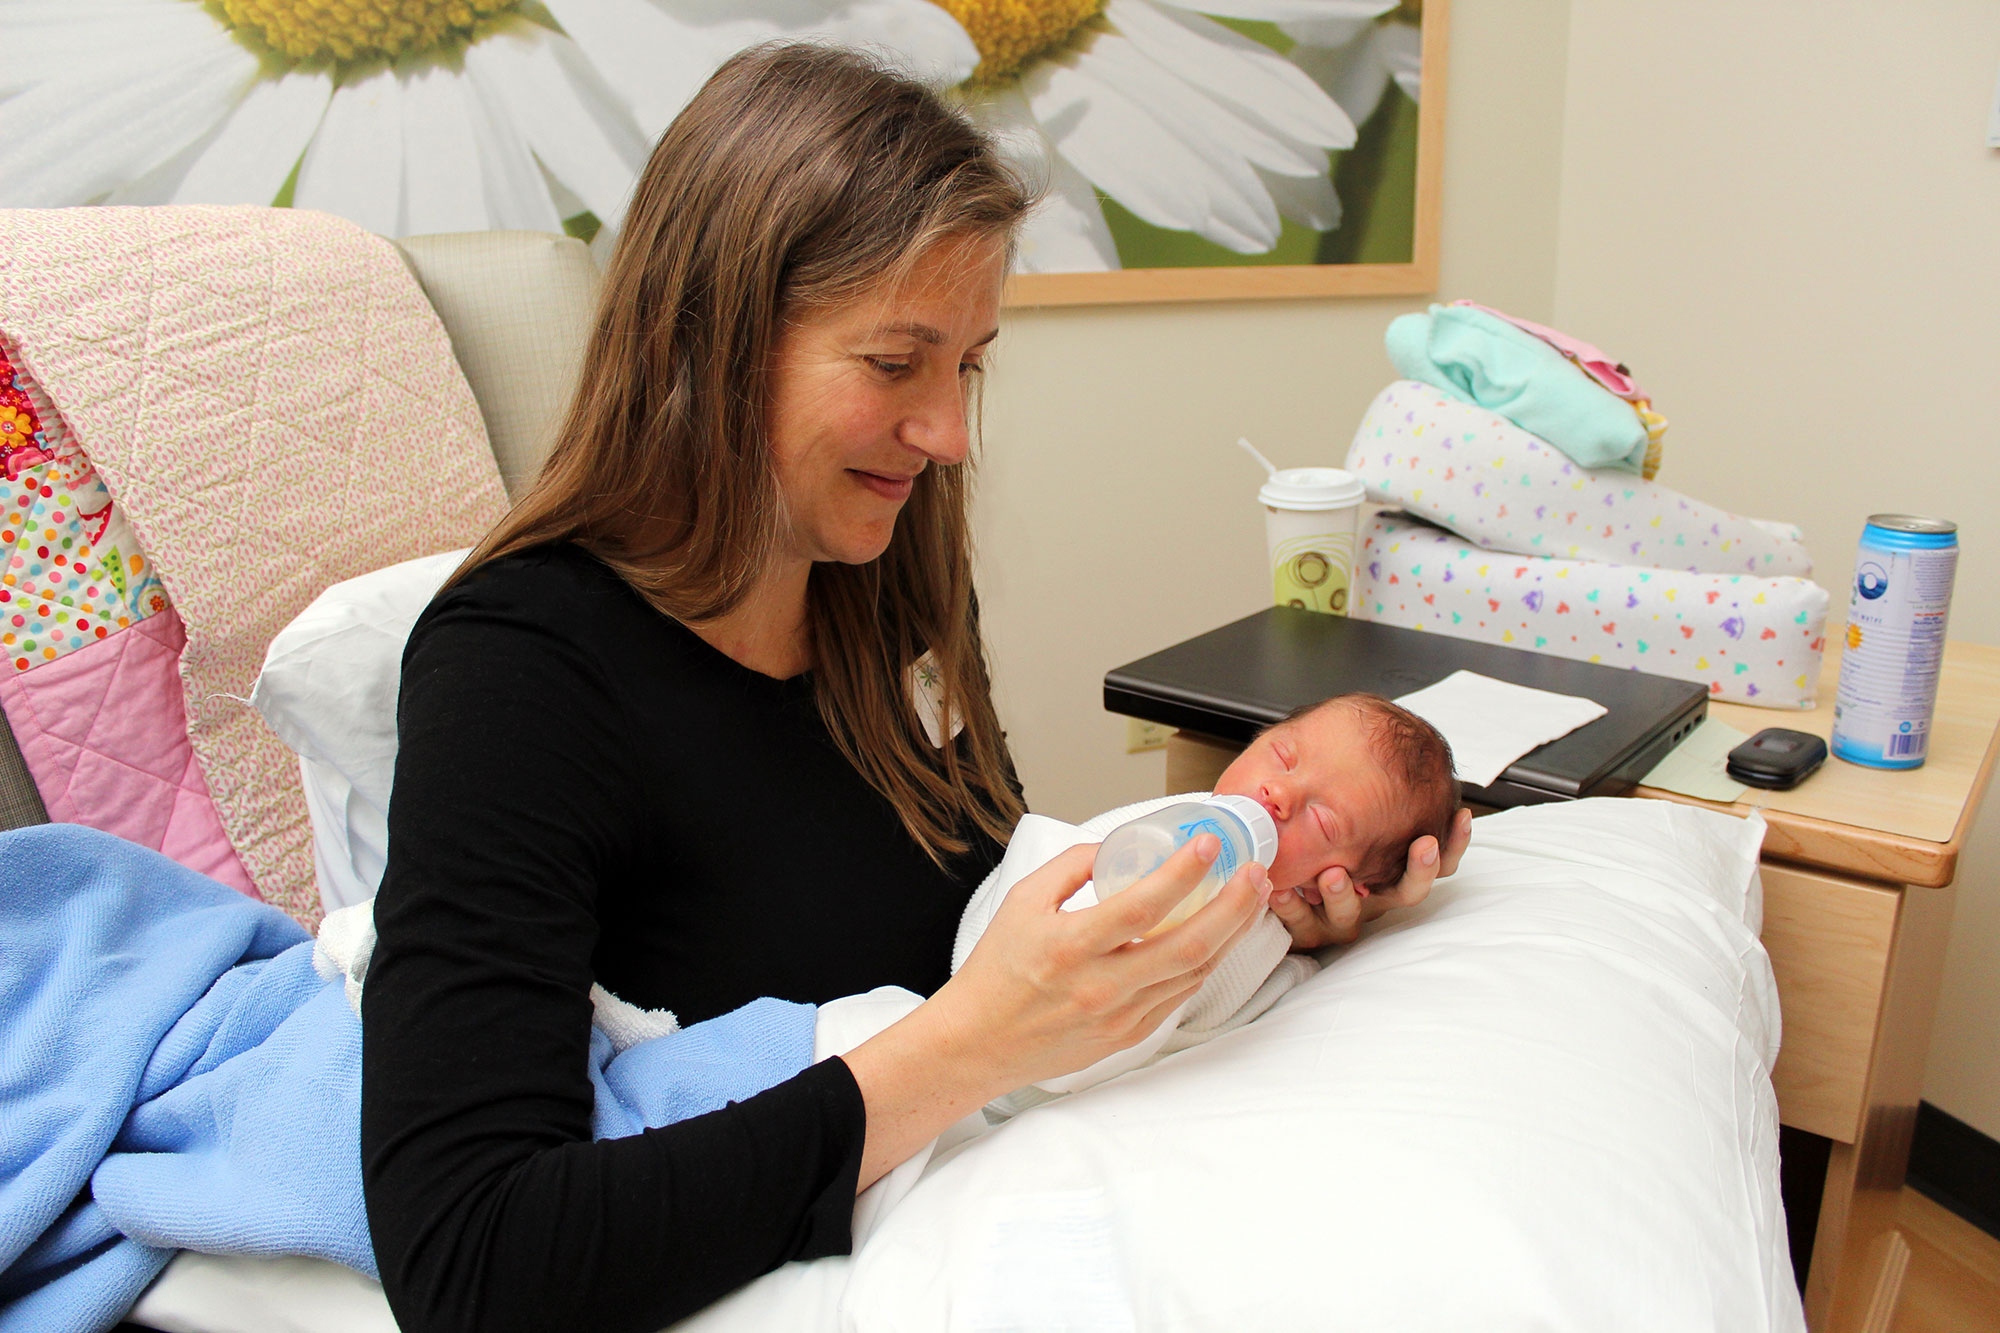 New NICU provides private, restful space for families